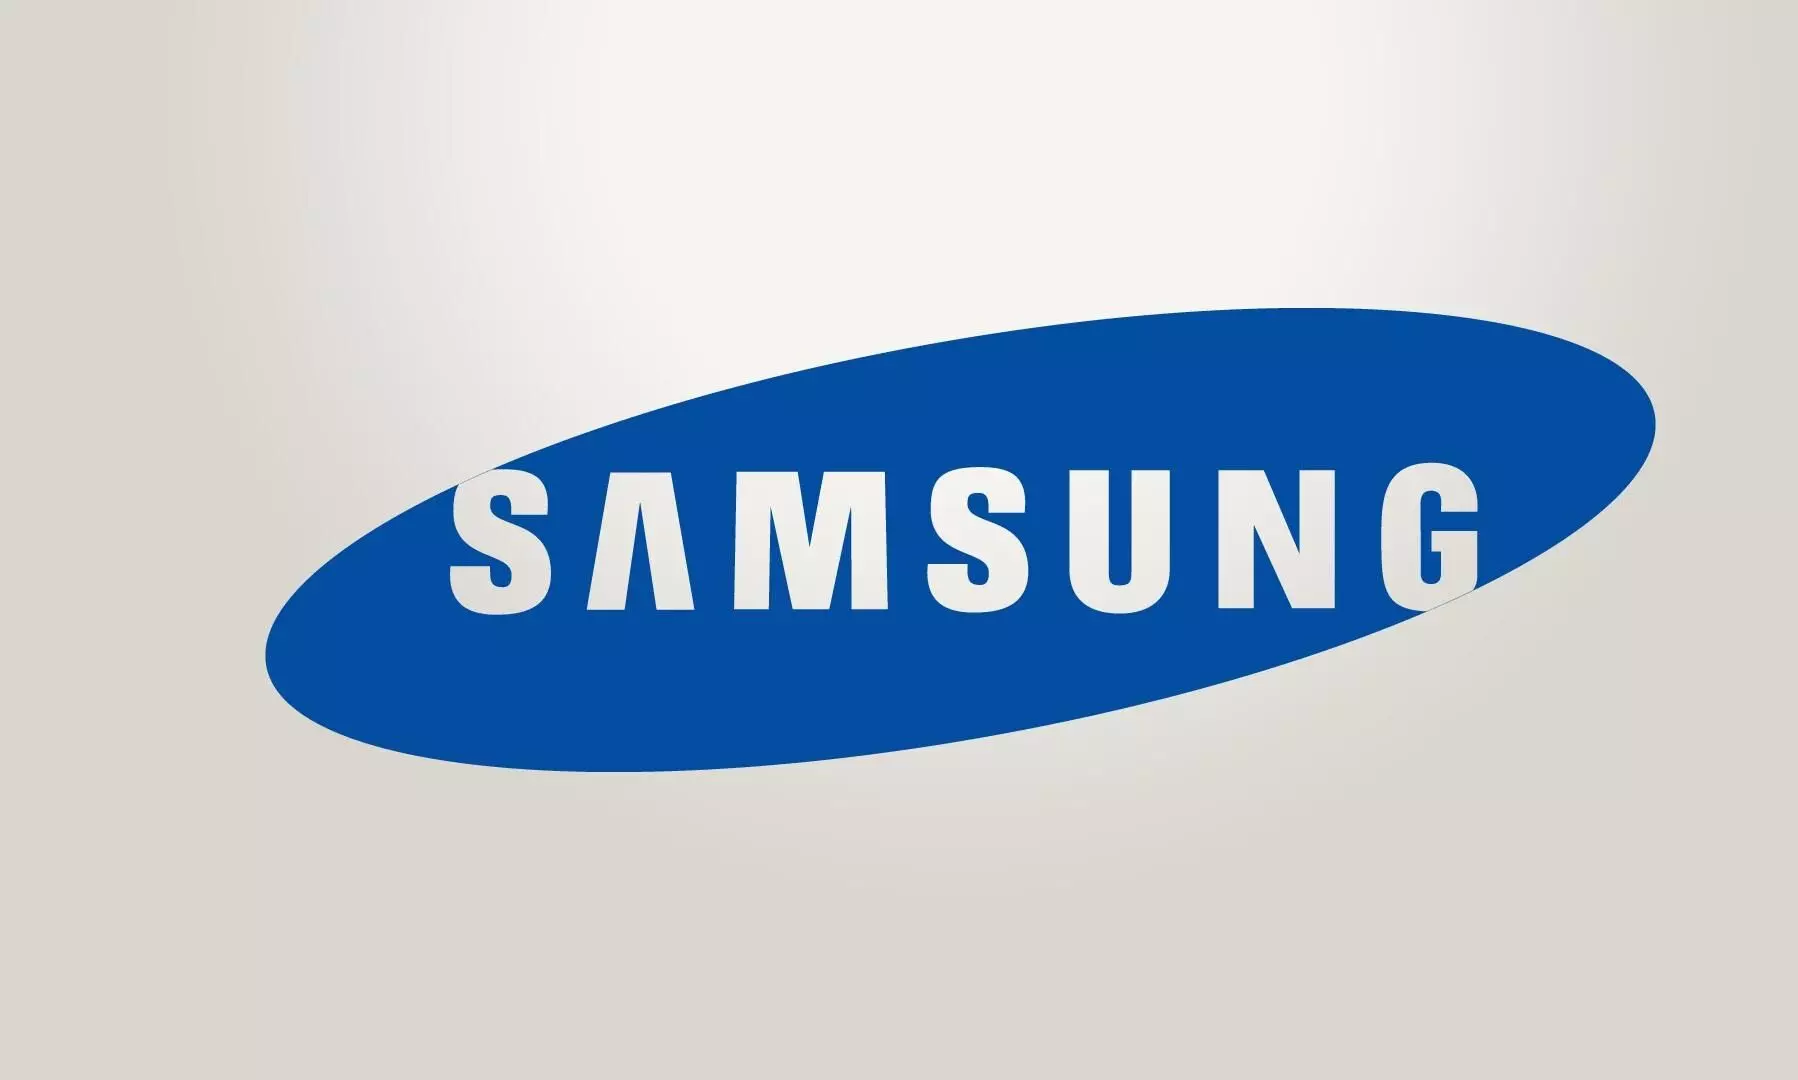 Samsung launches live online shopping platform in India